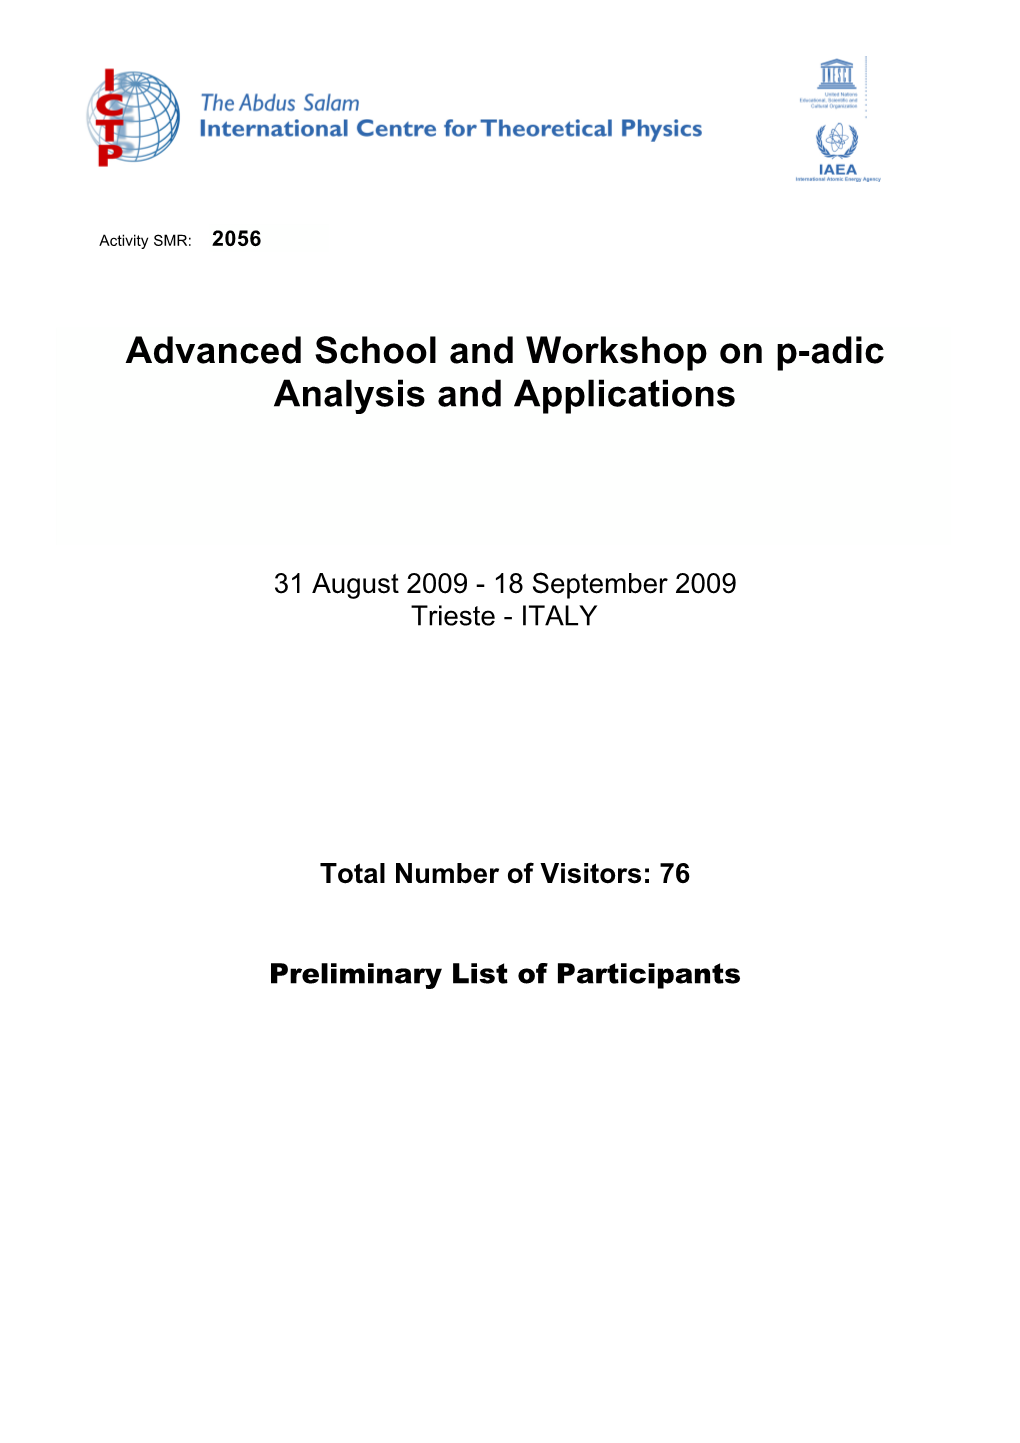 Advanced School and Workshop on P-Adic Analysis and Applications